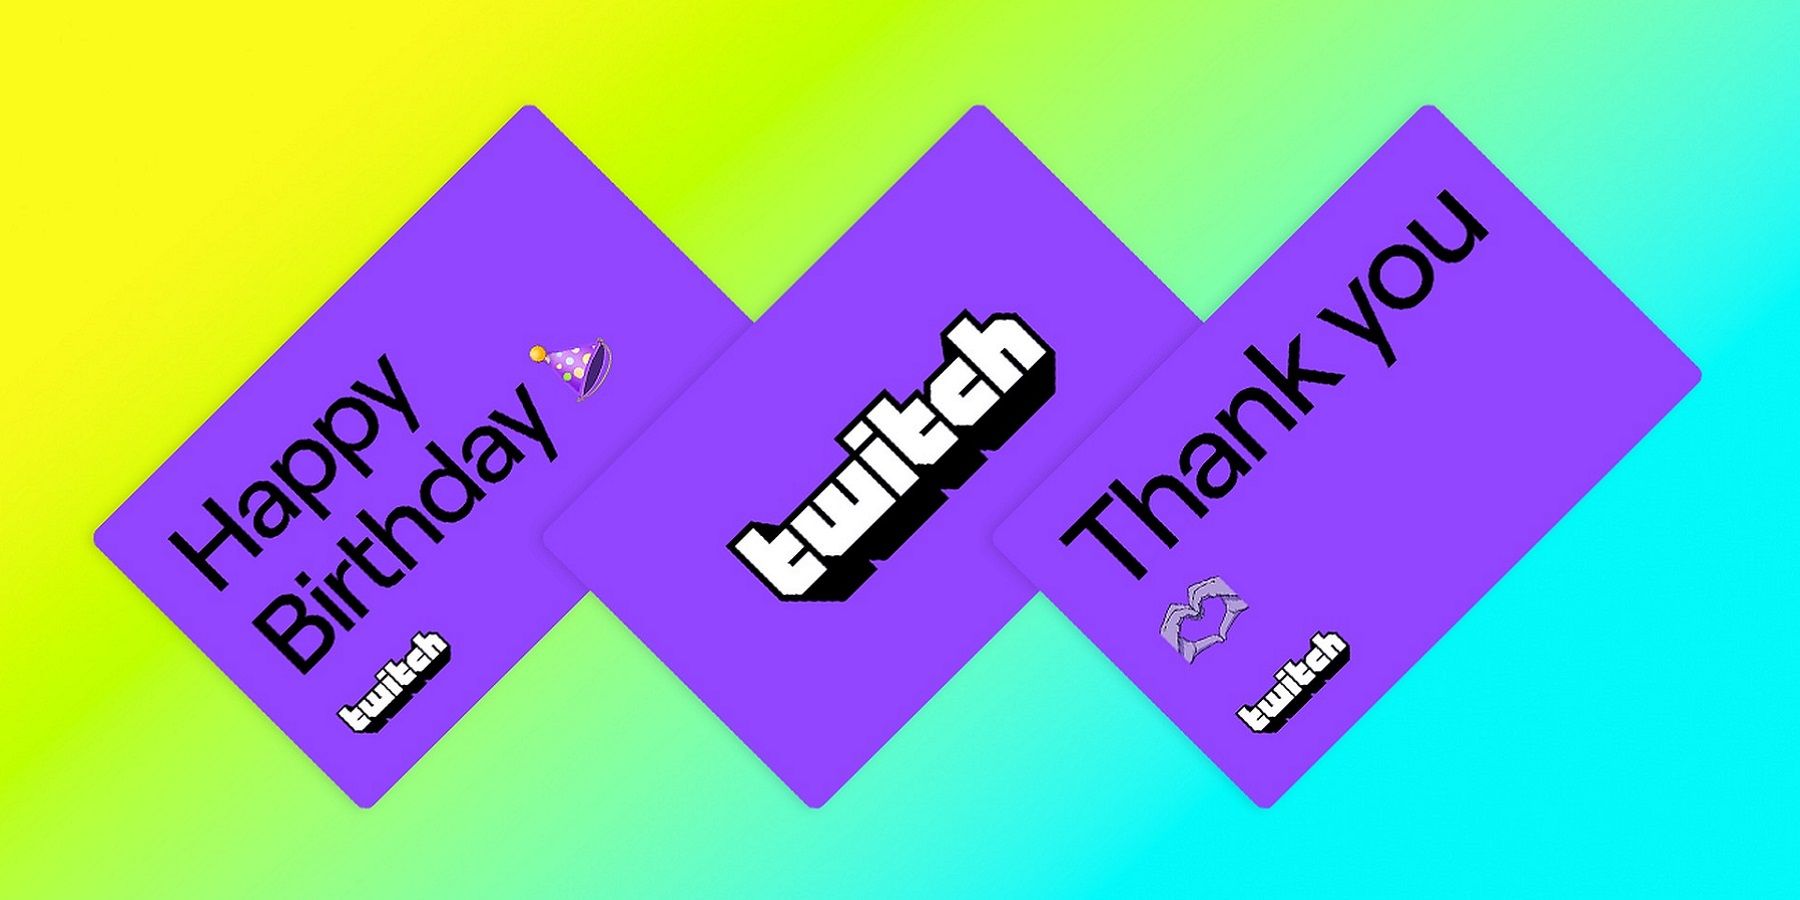 A bright image showing three Twitch gift cards.